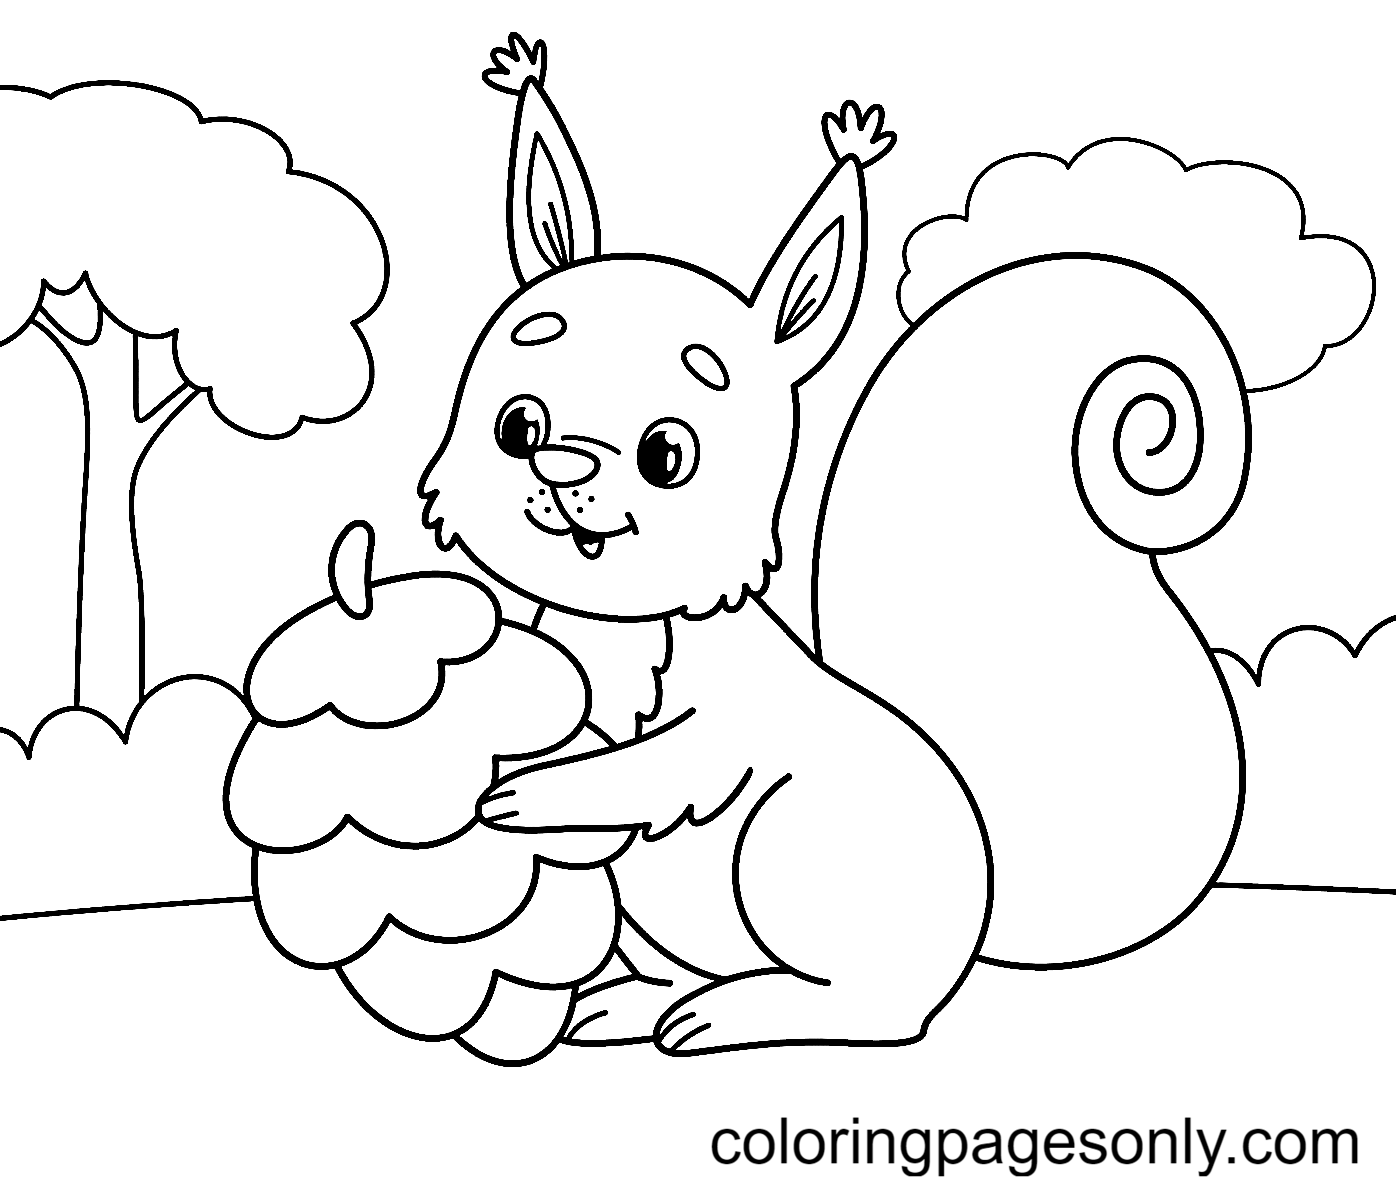 Squirrel coloring pages printable for free download